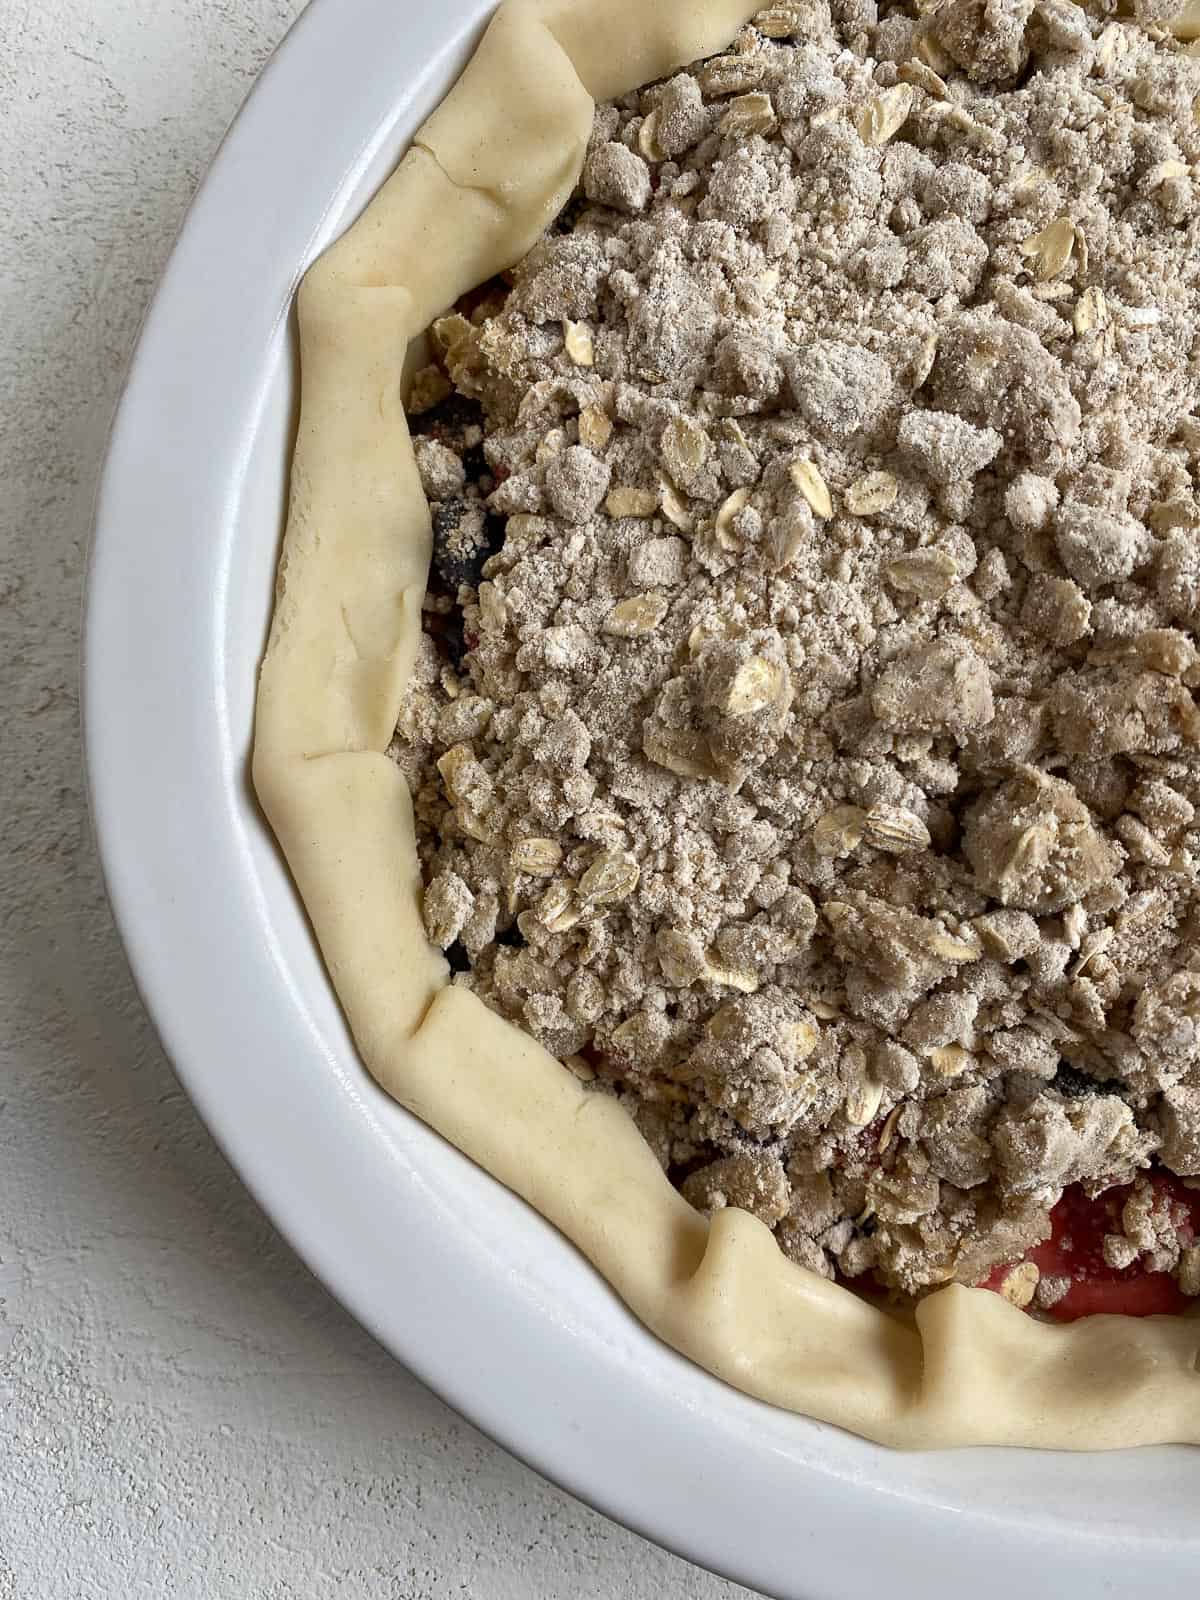 pre-baked close up of Mixed Berry Crumb Pie in pie dish